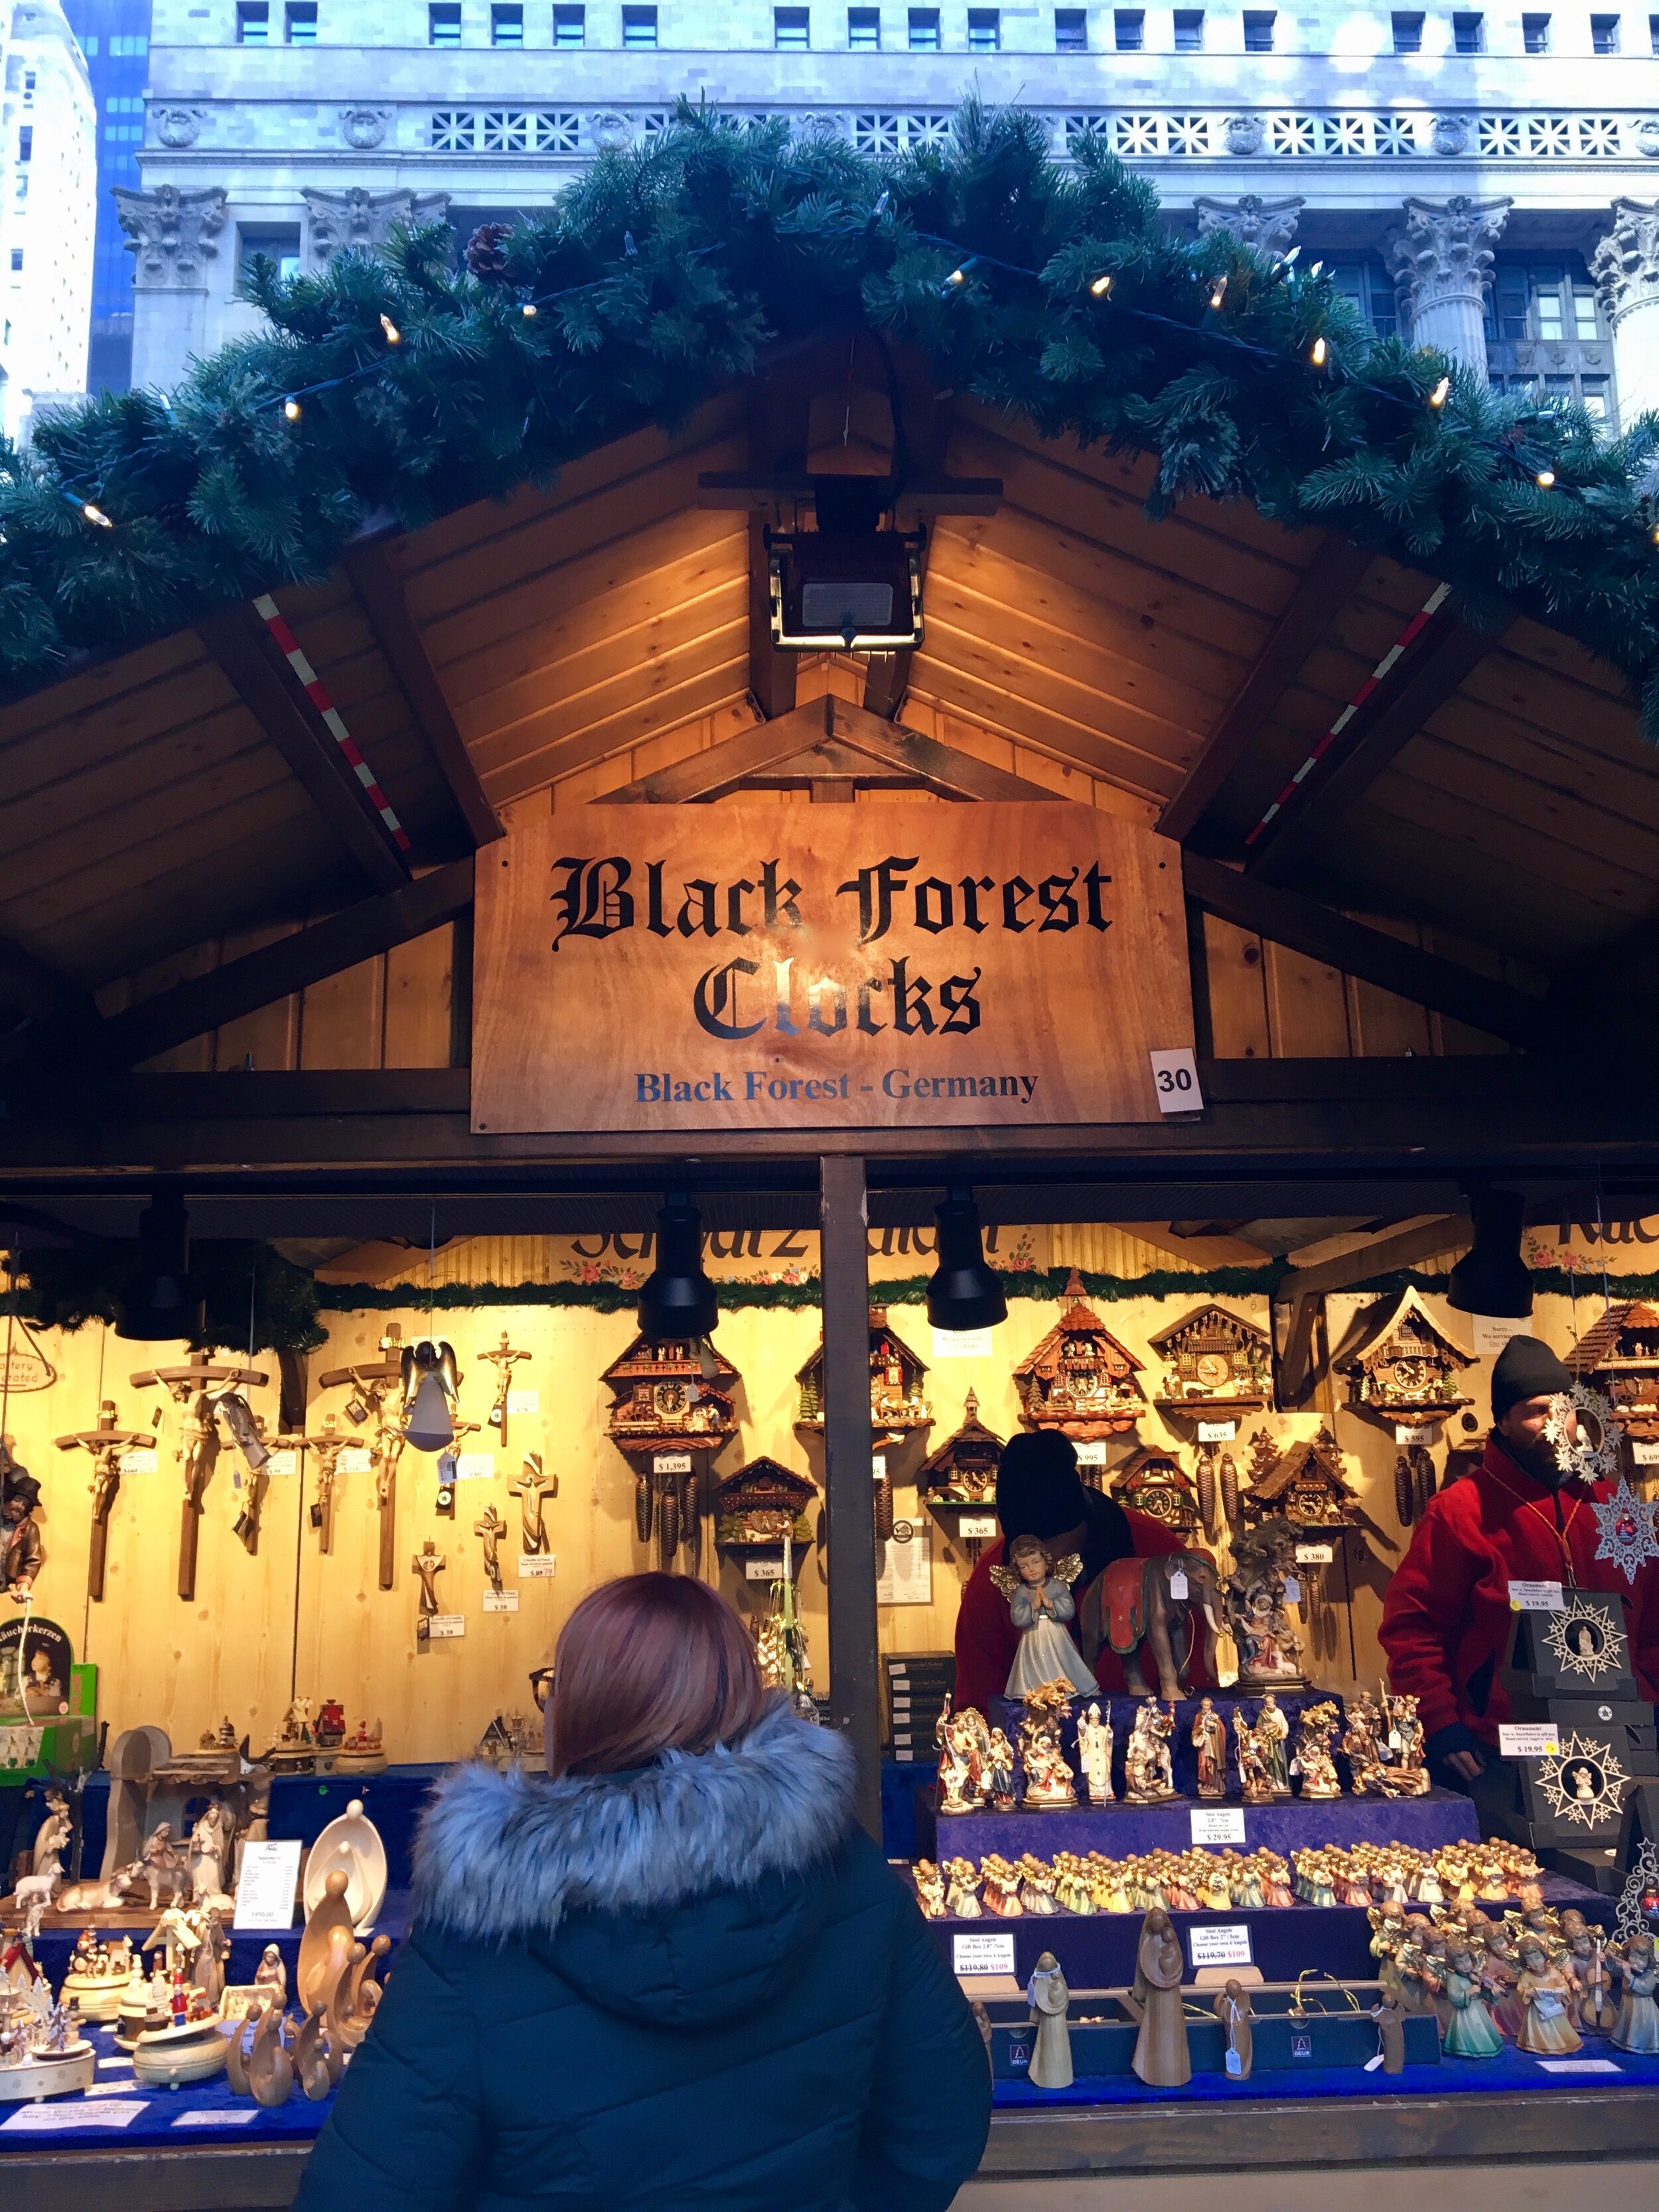  Black Forest Clocks, from Germany’s Black Forest 